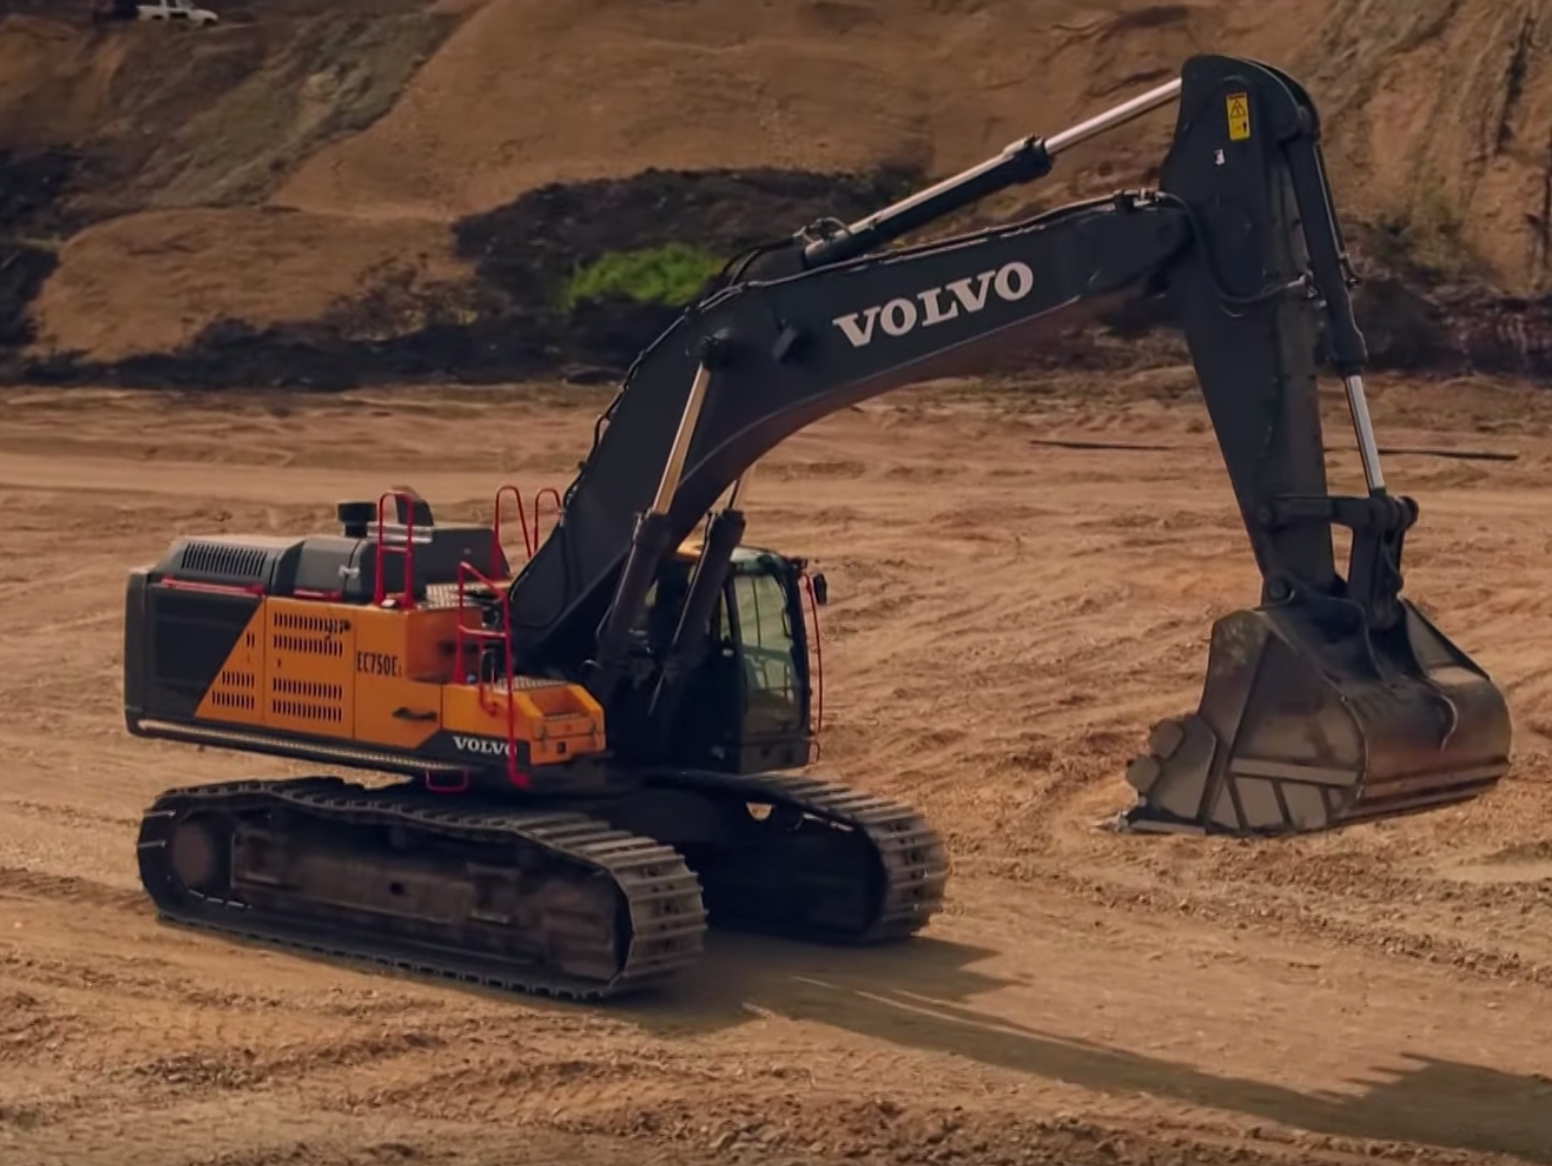 ‘Gold Rush’ Parker Schnabel Brings In the Biggest Excavator You’ve Ever Seen!